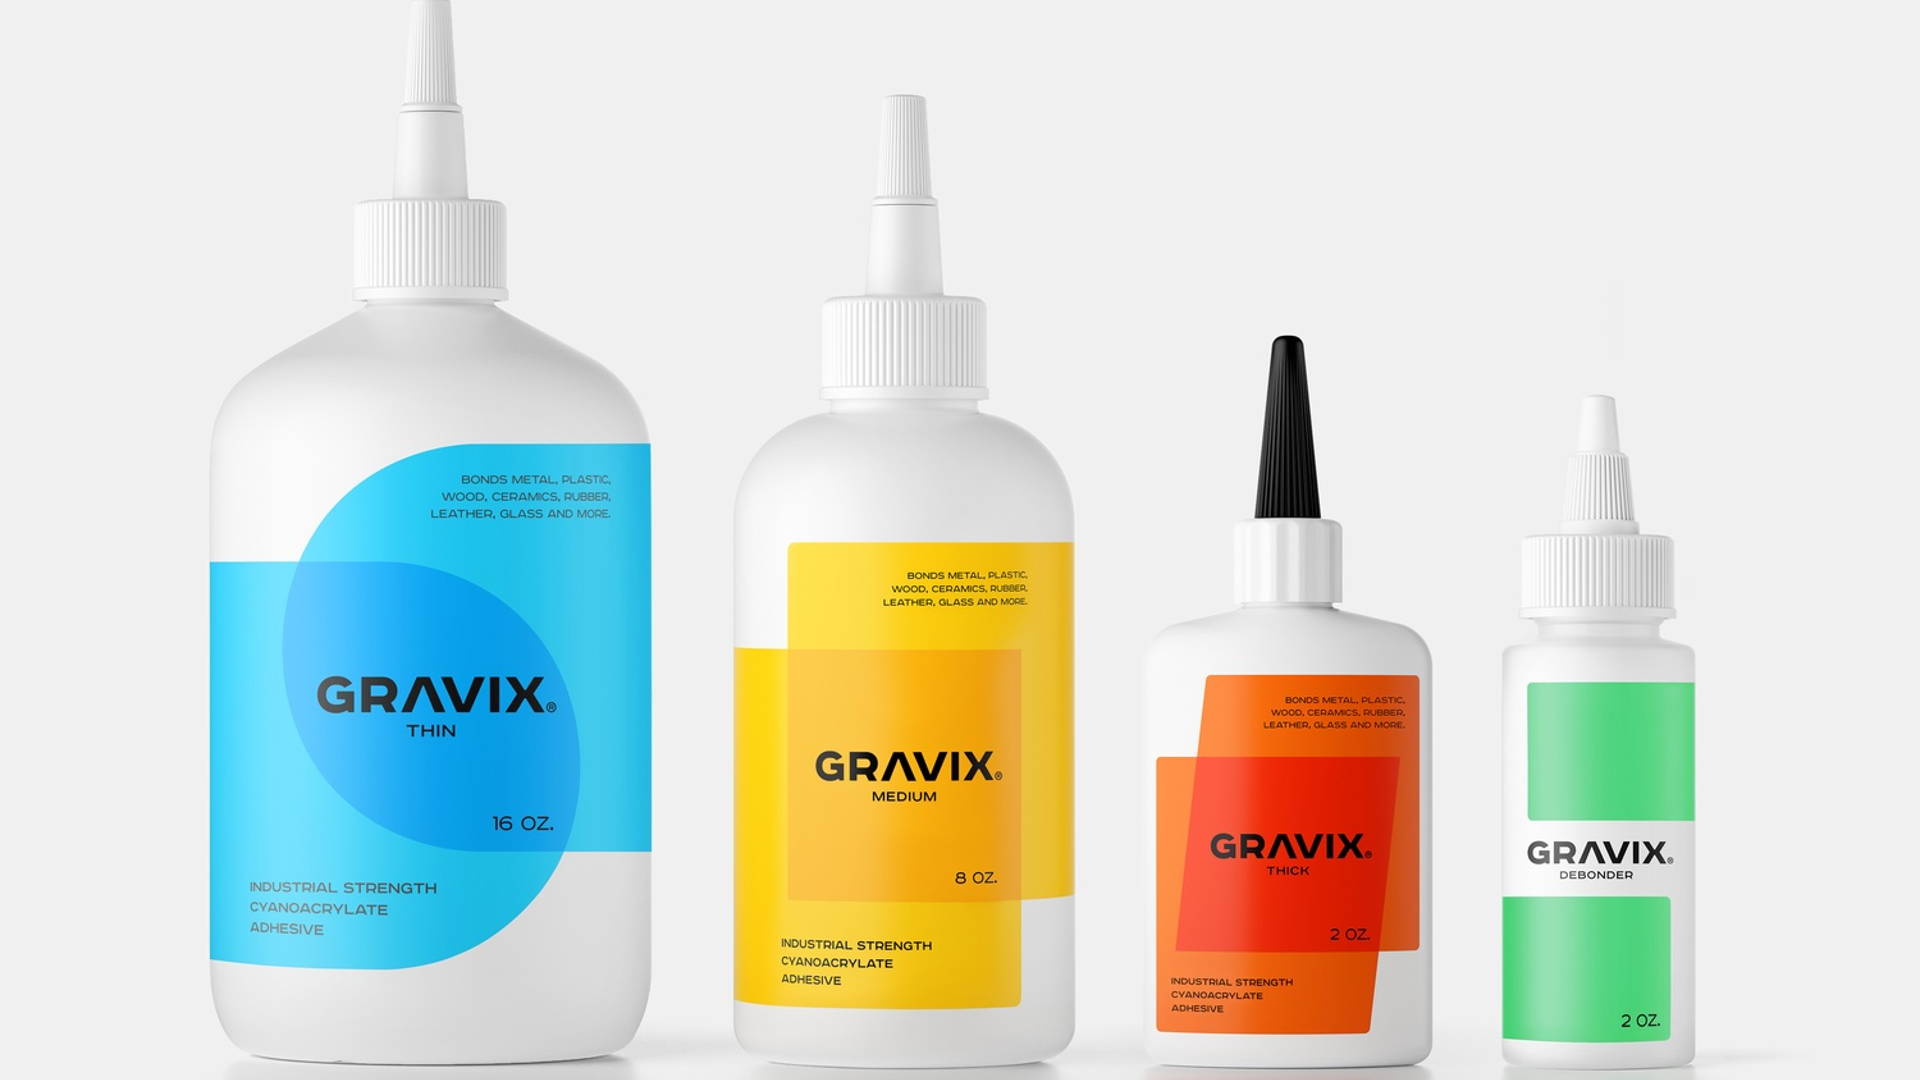 Featured image for Gravix Glue Reveals The Power Of The Product